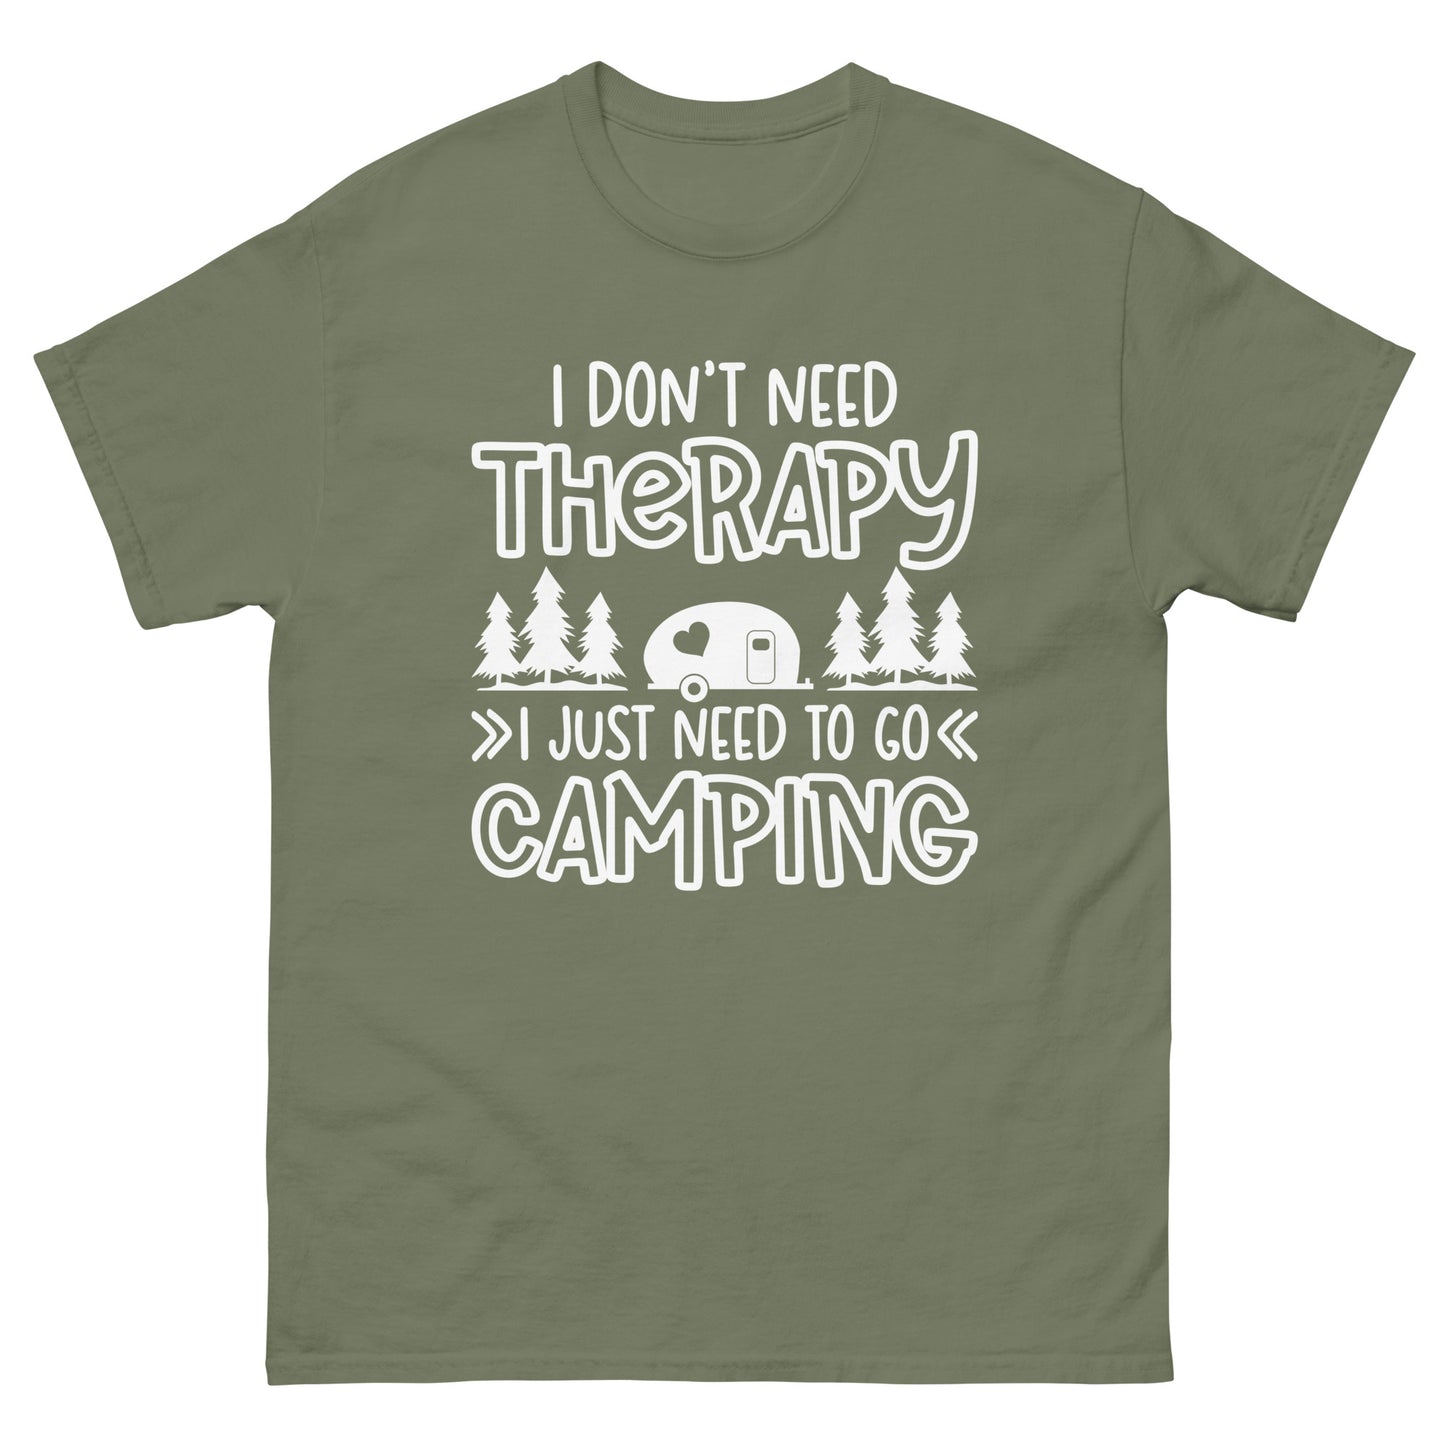 I don't need therapy I just need camping - classic tee